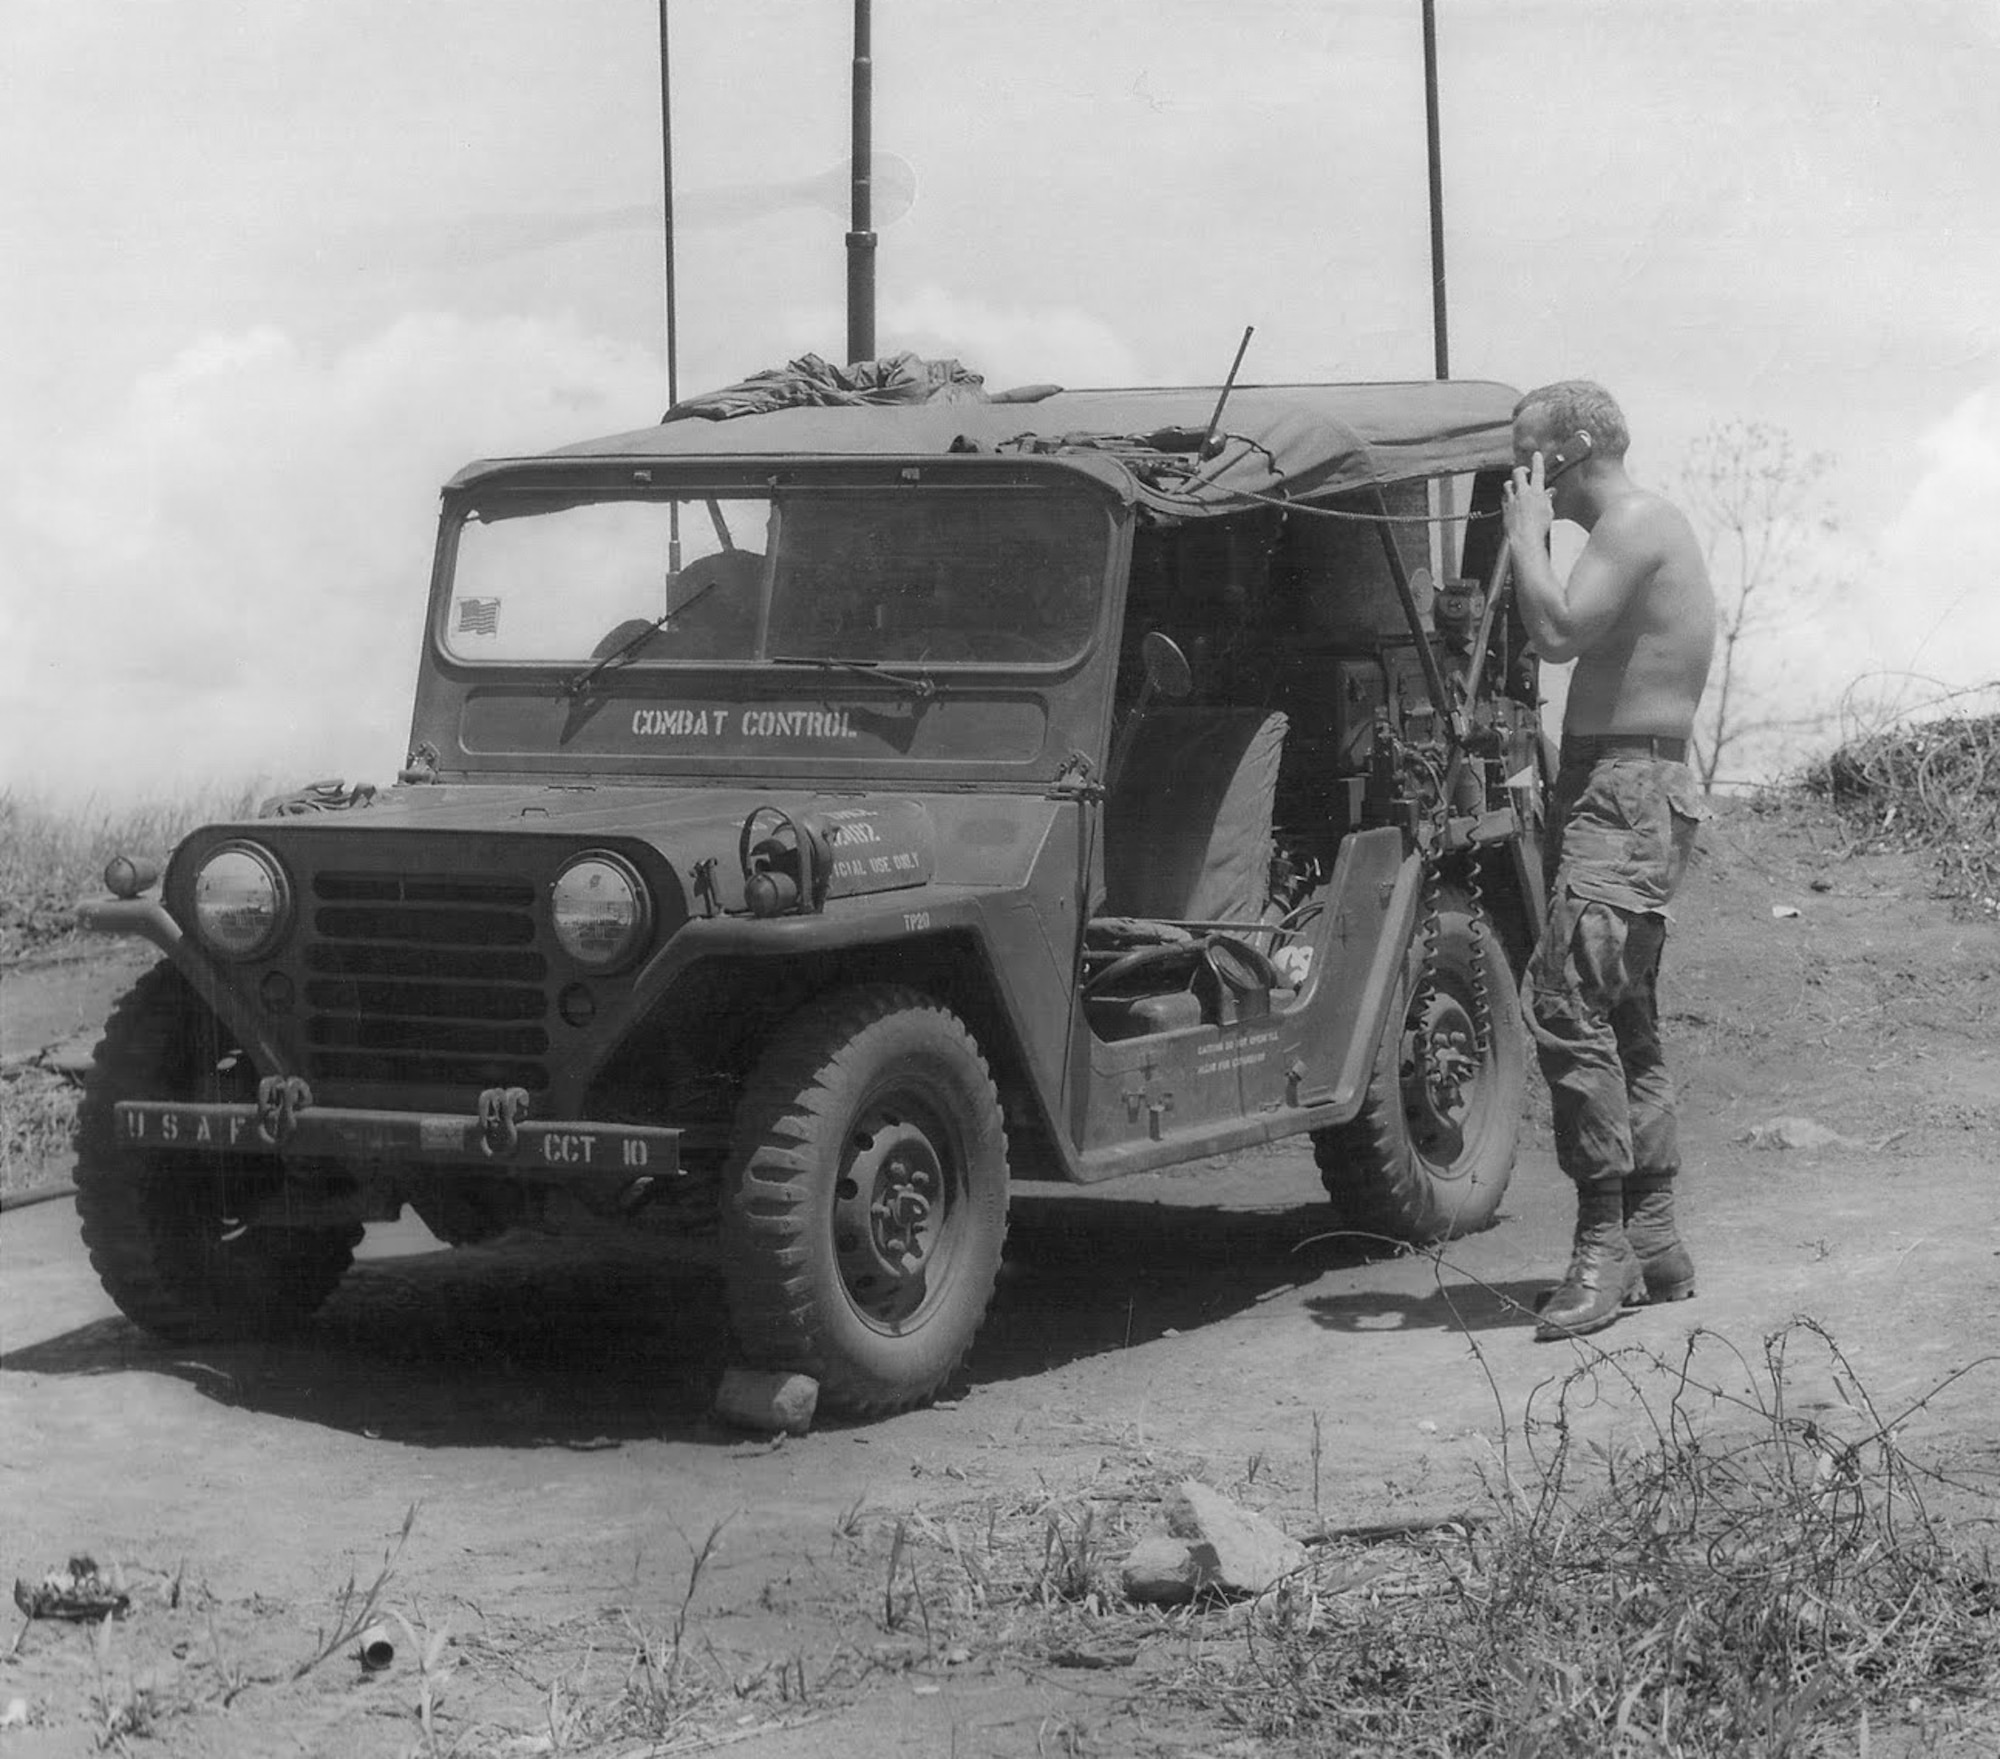 AN/MRC-108 being used by a Combat Control Team (CCT) in Southeast Asia (ca. 1971). (Photo courtesy of Combat Control Net)